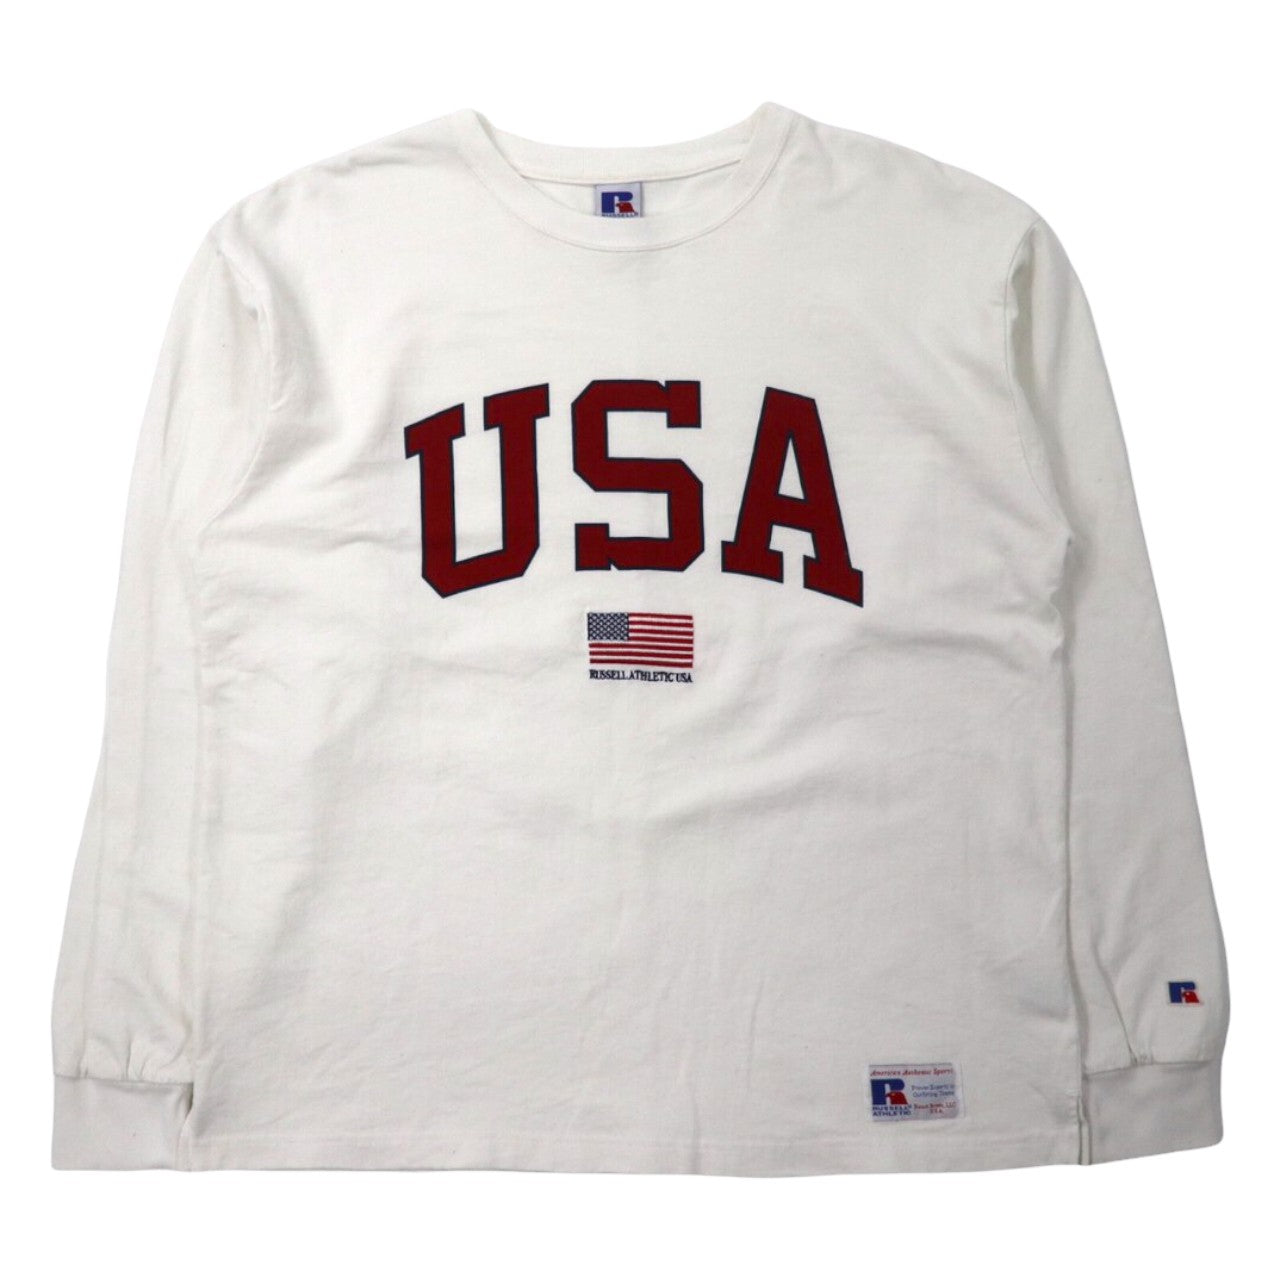 Russell Athletic Long Sleeve T -shirt L White Cotton USA Print